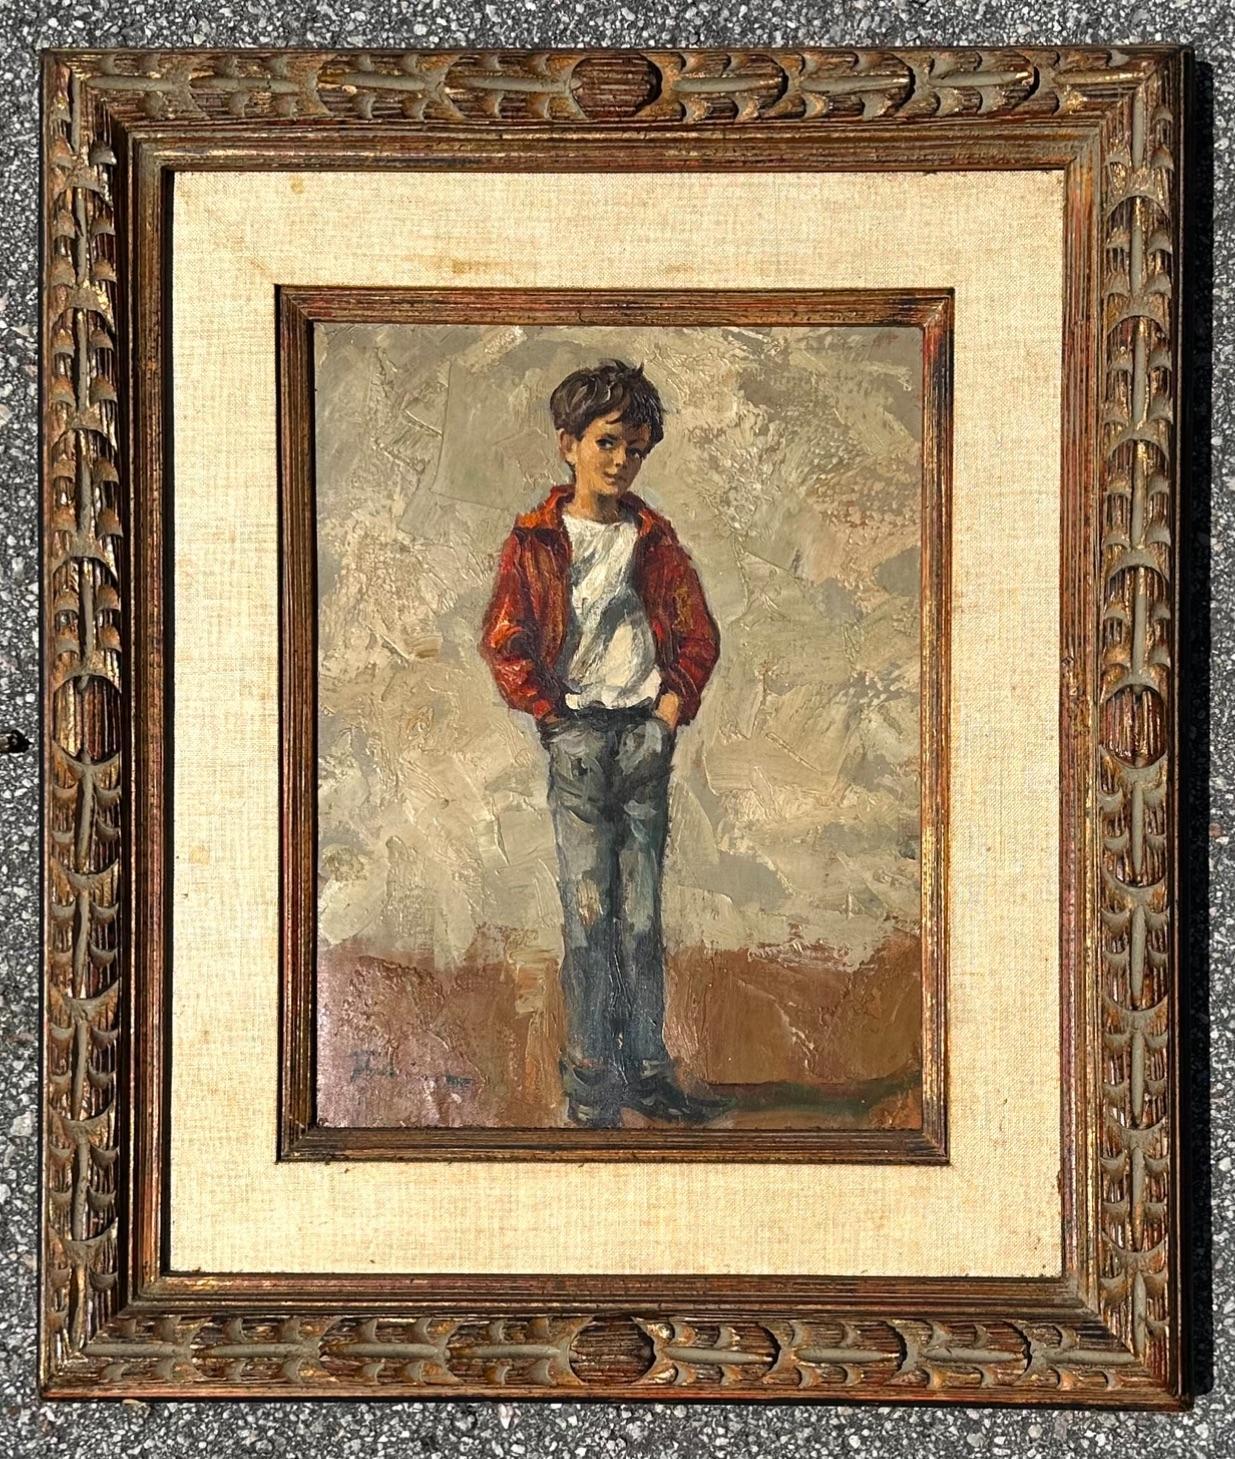 This original oil on canvas depicts a young boy in jeans smirking with his hands in his pockets. Compelling detail and strategic brush strokes and shading with subtle additions of color with the red in his shirt and the navy blue in his pants.